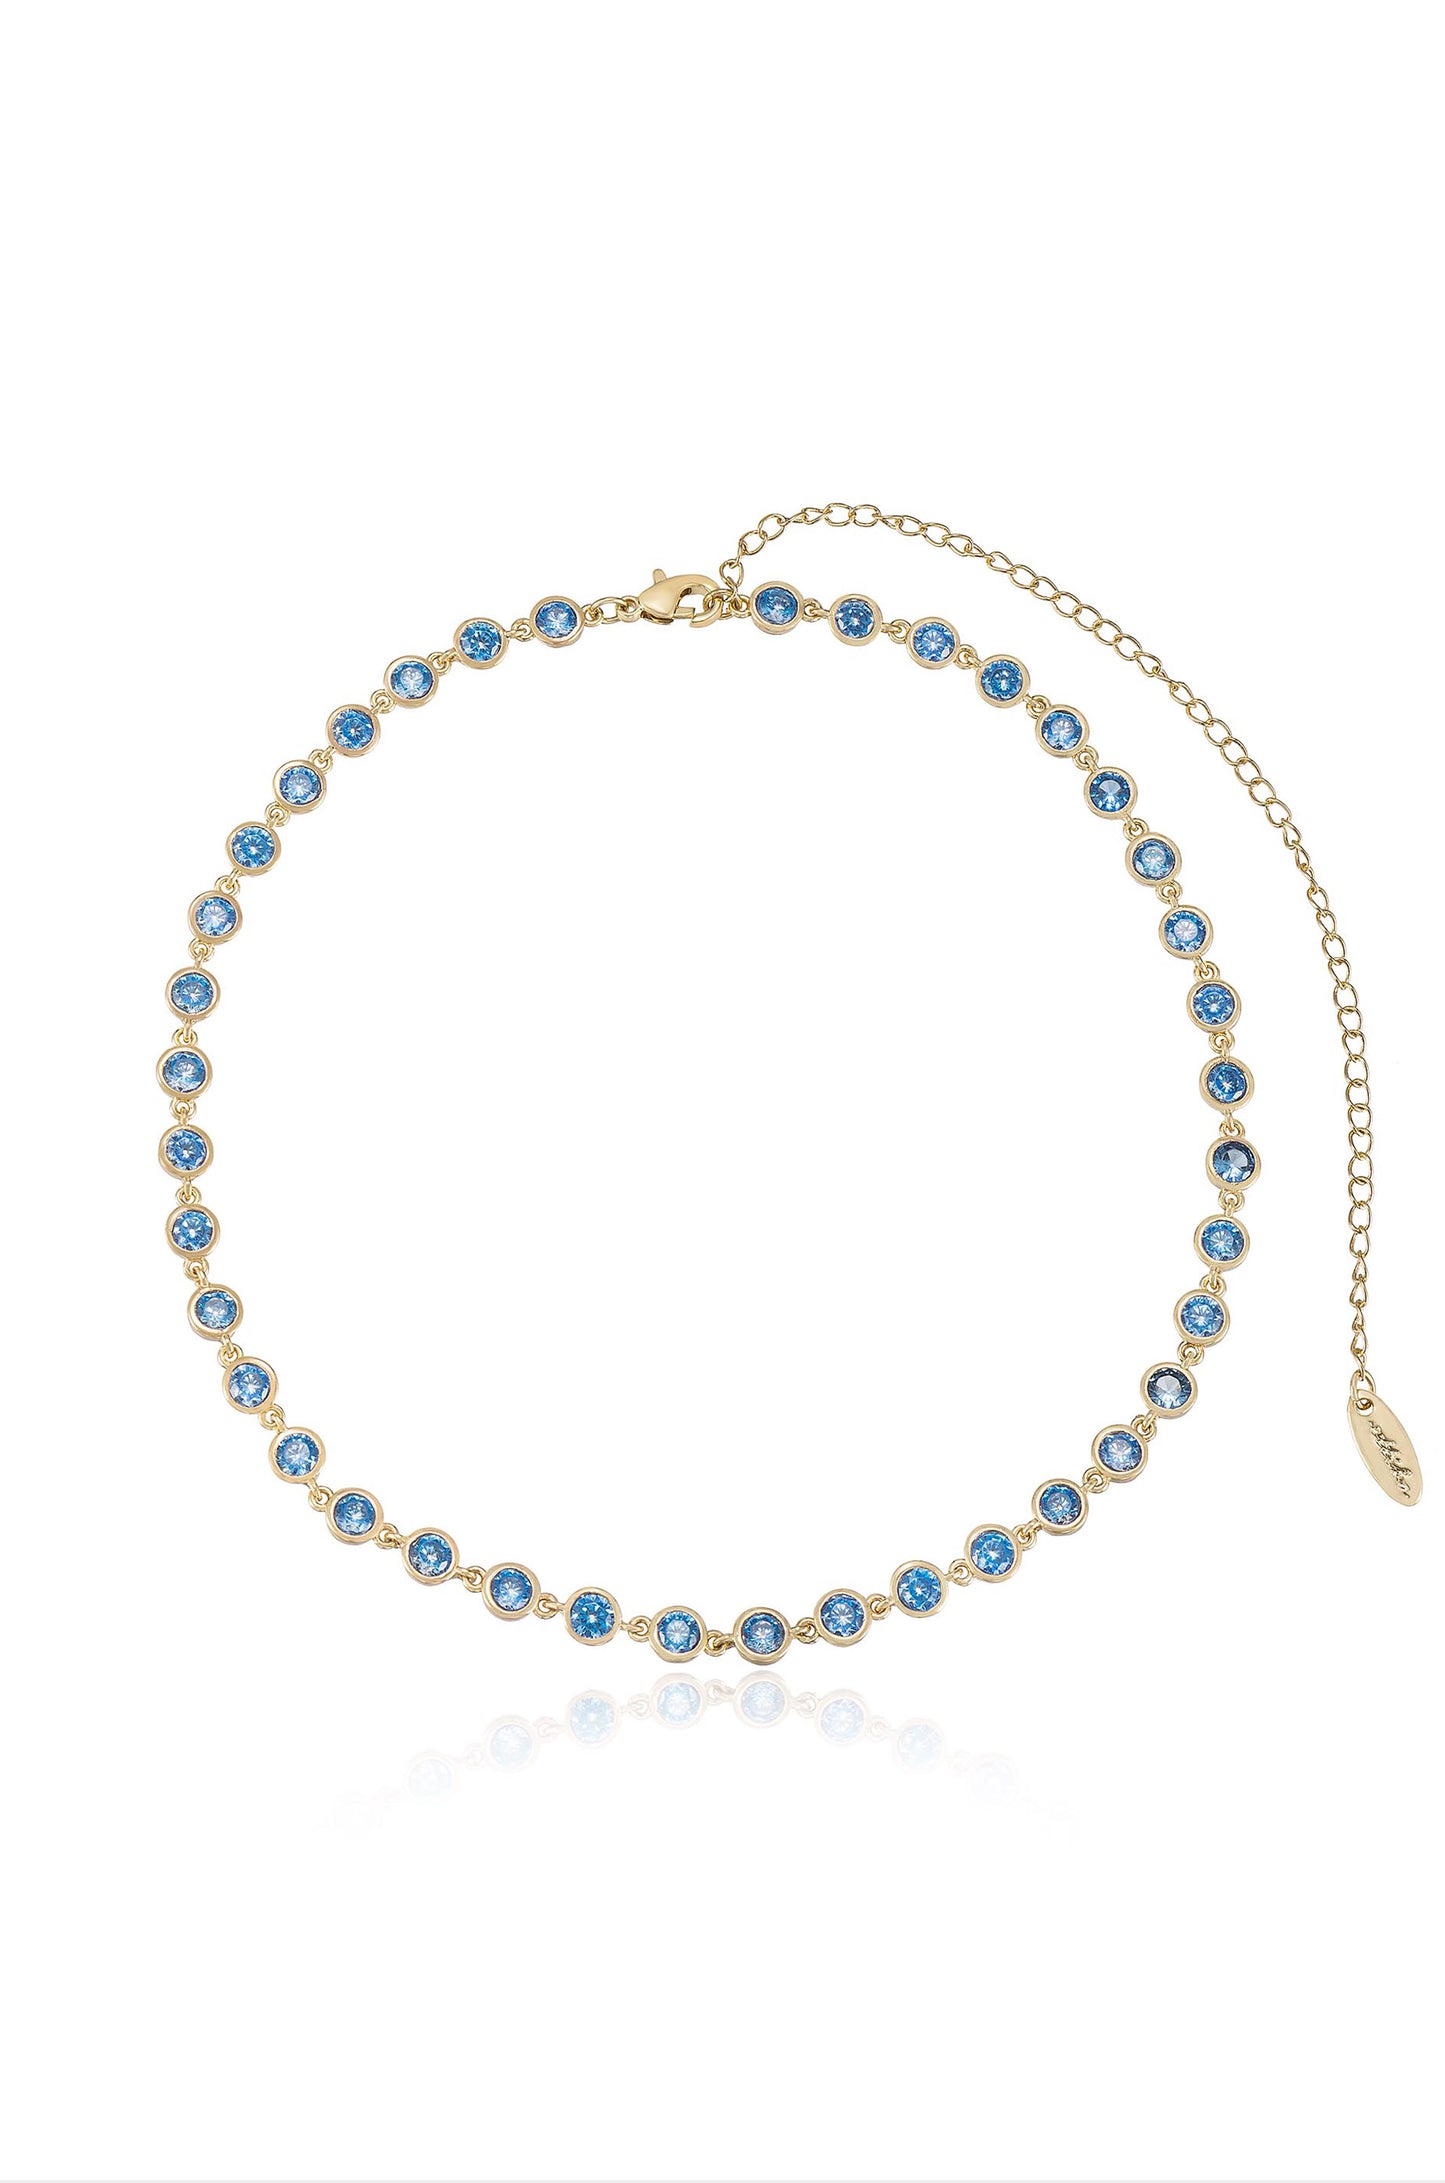 Crystal Disc and Link Necklace in aqua